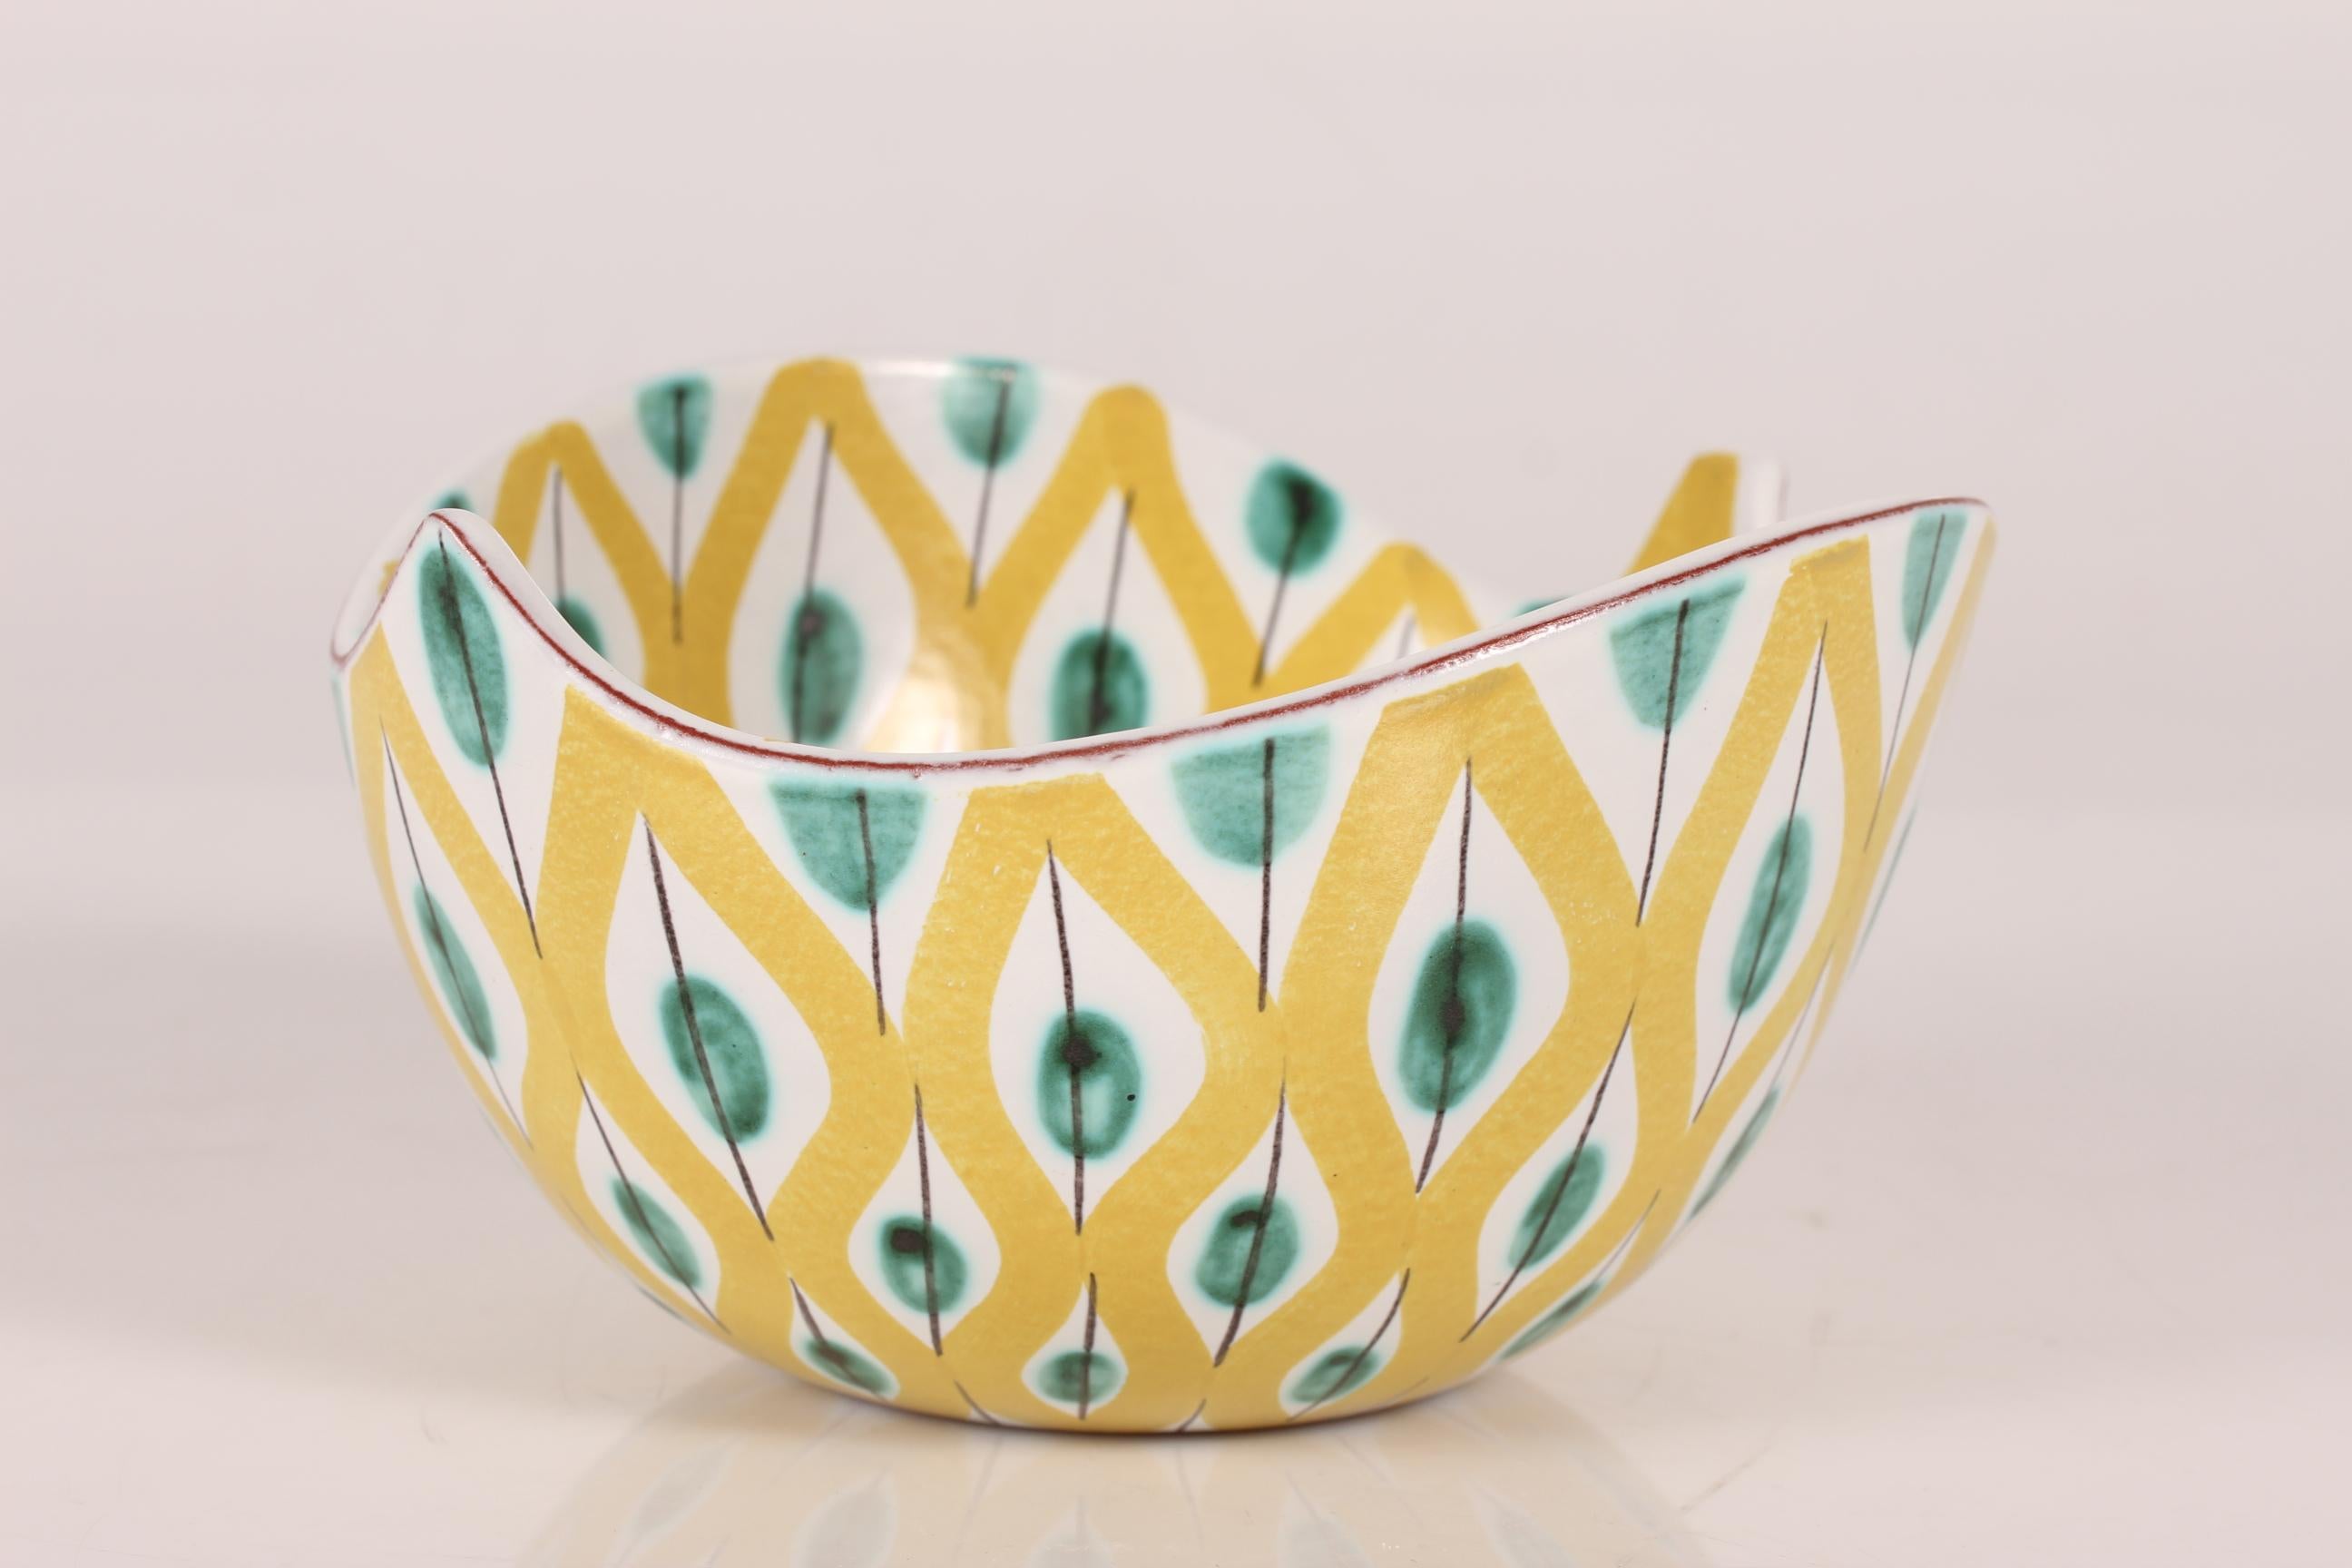 Original vintage Stig Lindberg organically shaped bowl model 82 16 made for Gustavsberg, circa 1950s.
It's made of ceramic and features a colorful abstract hand painted decoration.
Sign. Studiohand for Stig Lindberg + G for Gustavsberg.